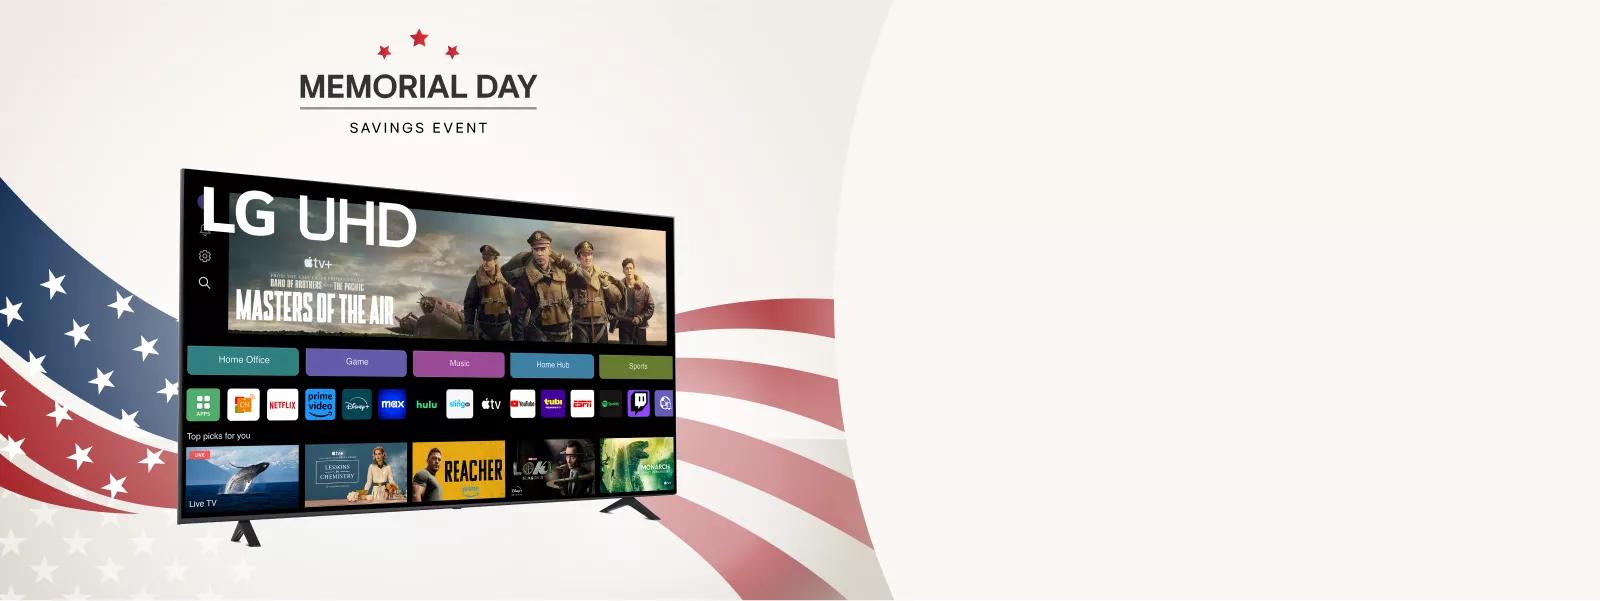 Enjoy larger-than-life 4K picture with LG UHD TVs — with 300+ free LG Channels for content you’ll love all summer. 